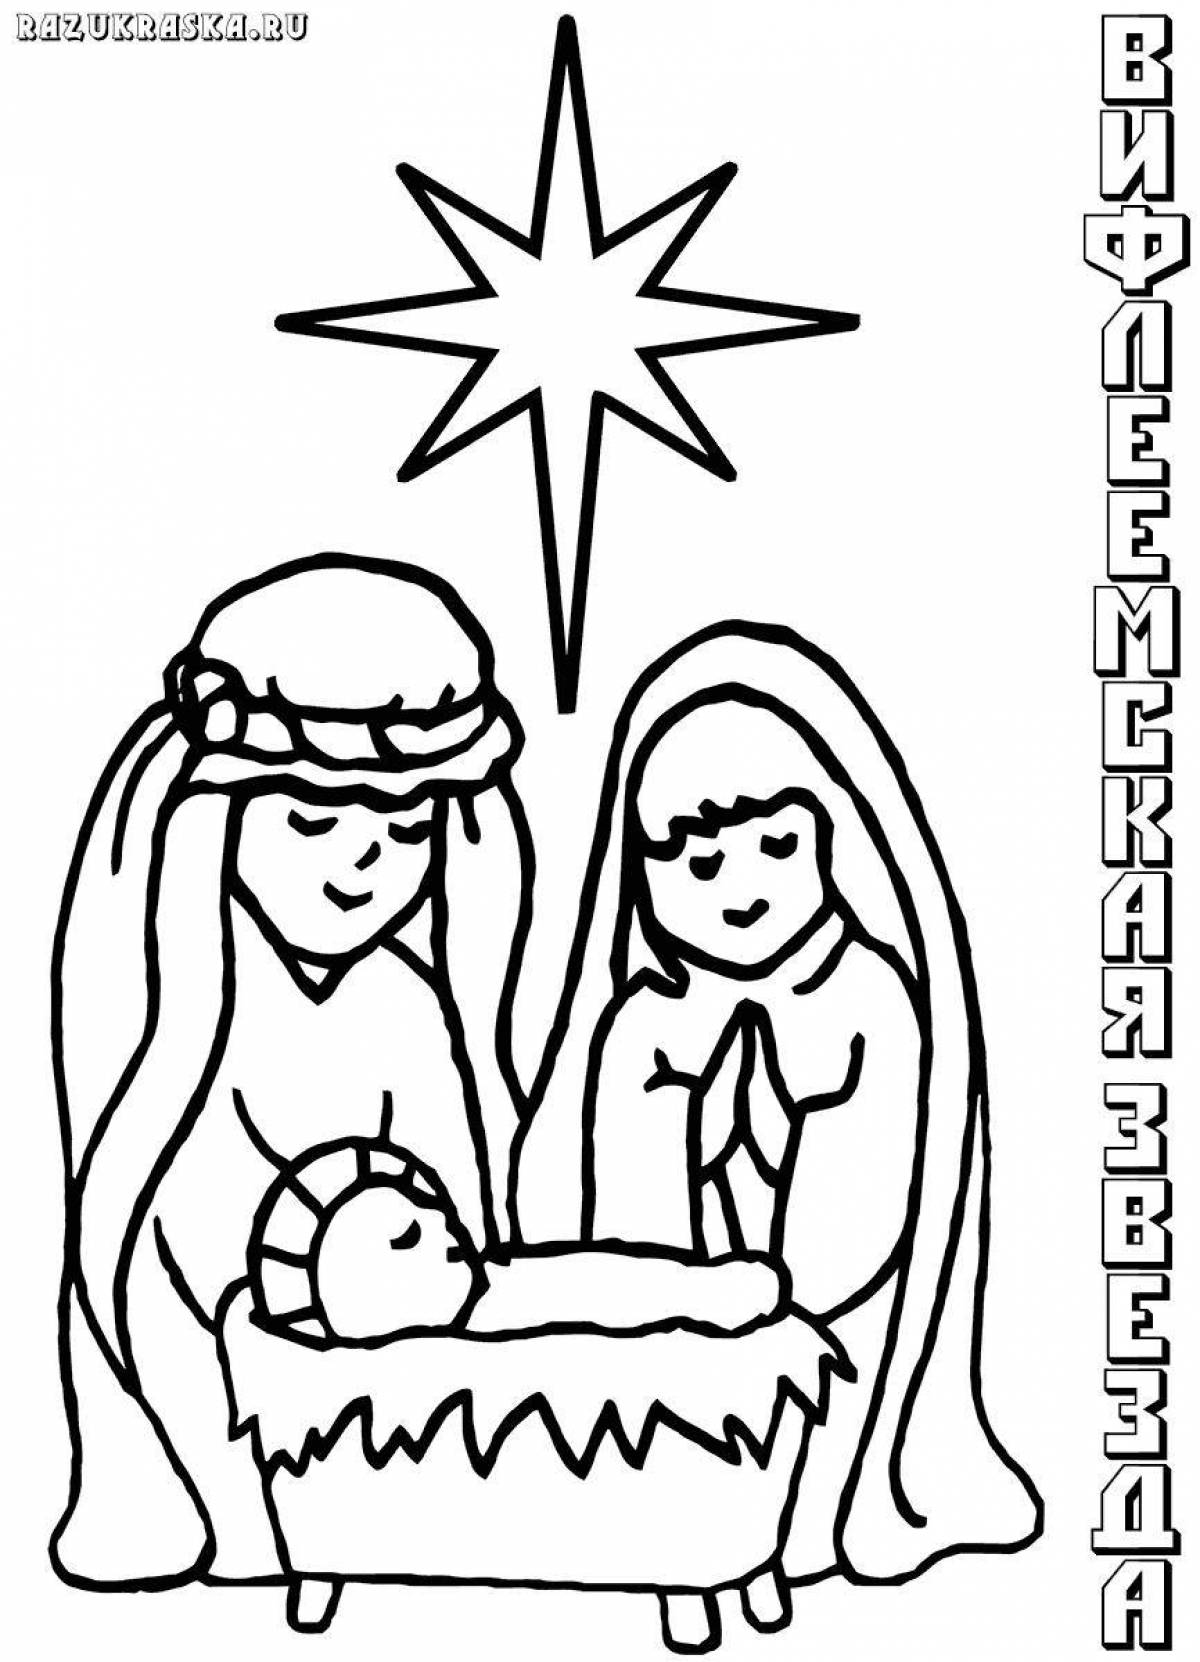 Exquisite star of bethlehem coloring book